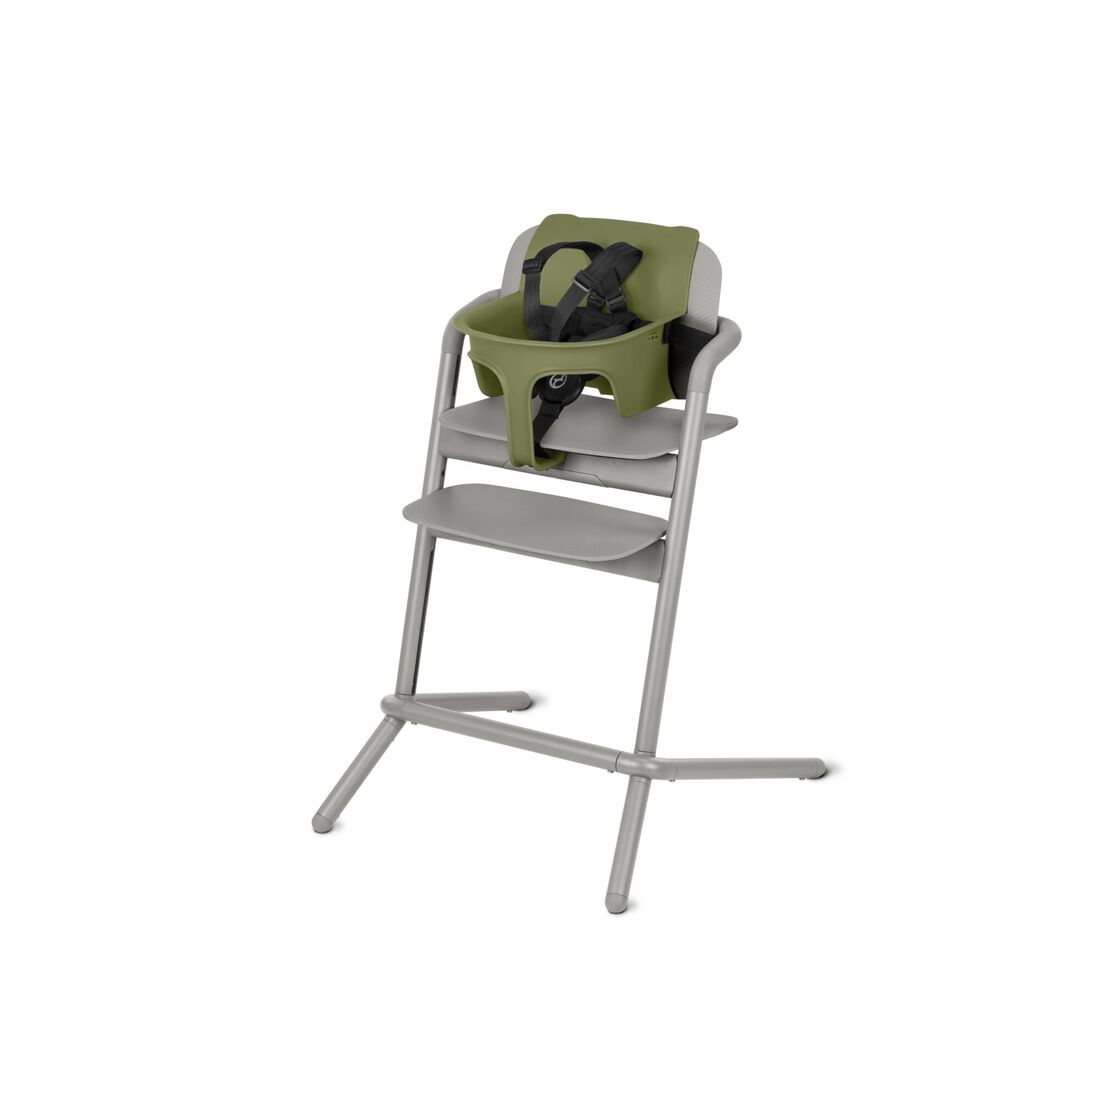 CYBEX Lemo Baby Set 2 - Outback Green in Outback Green large